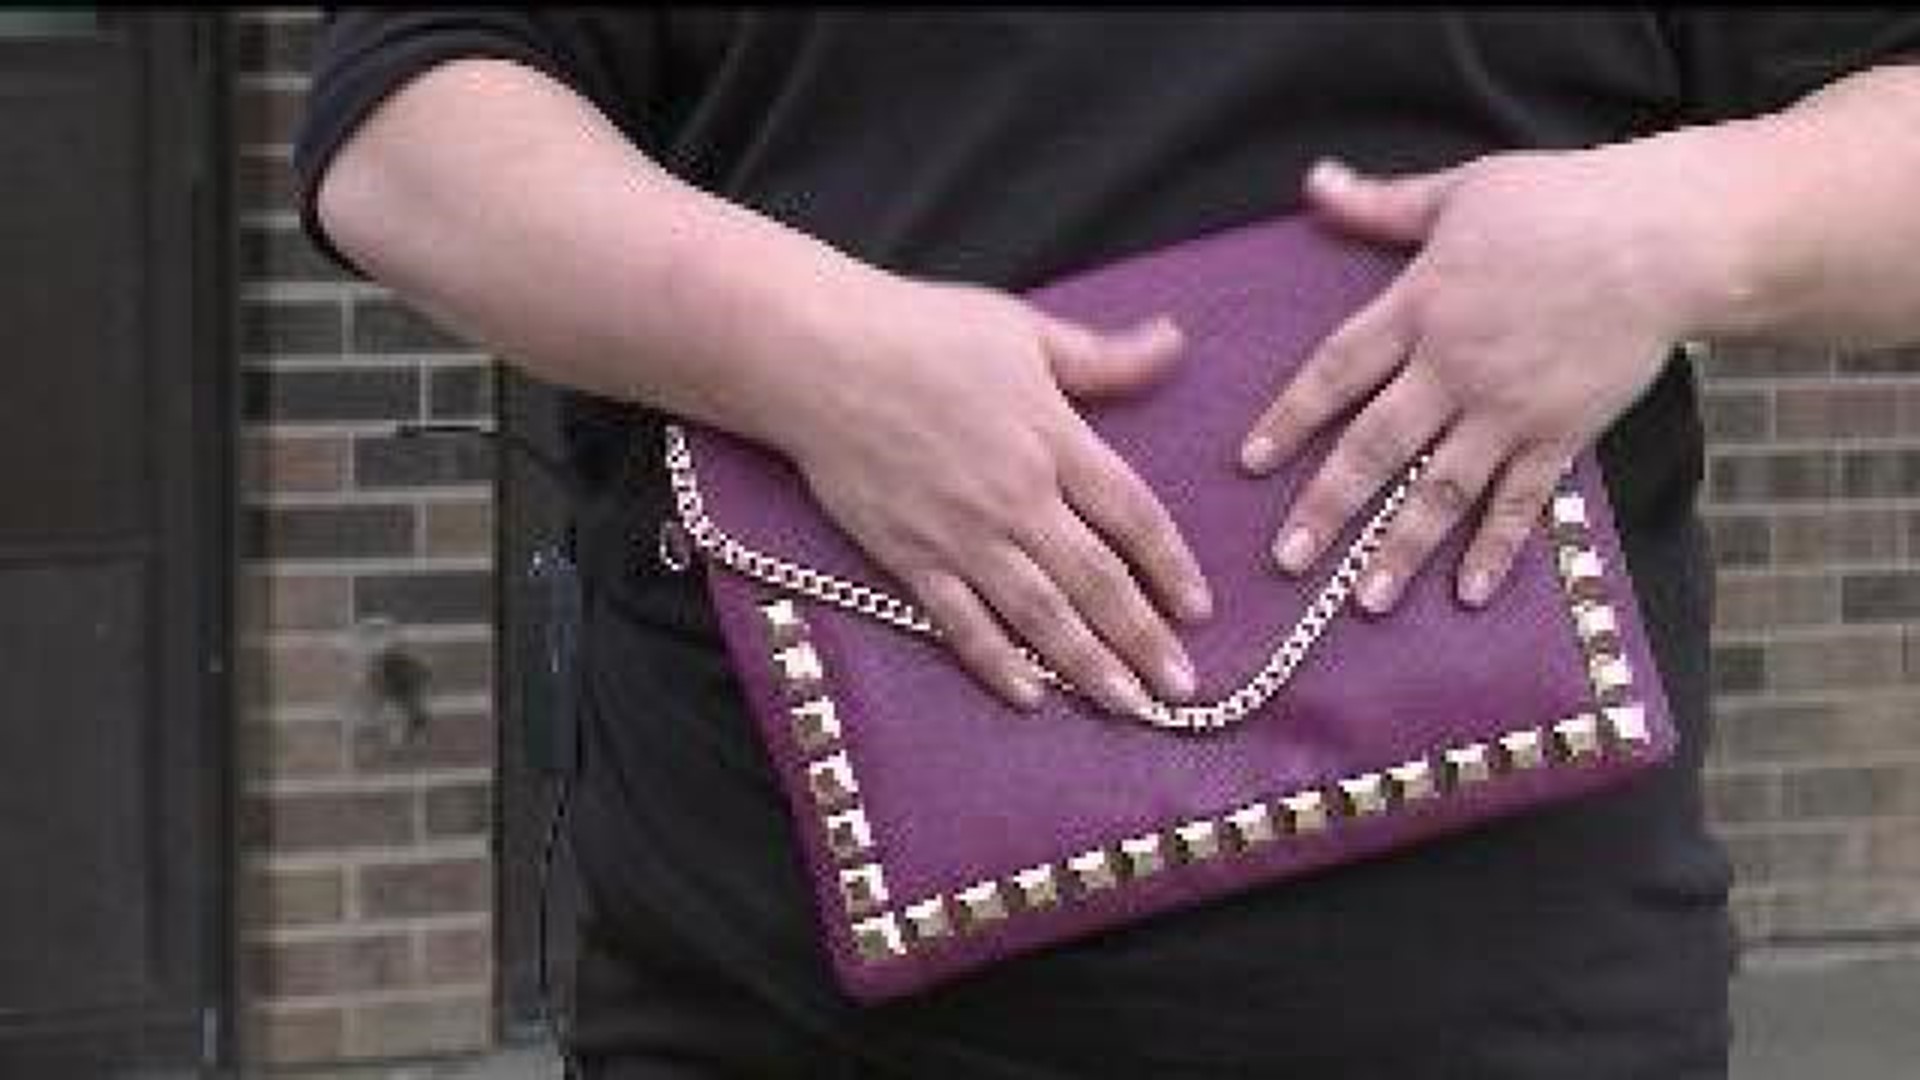 Teen punished for purse containing feminine products